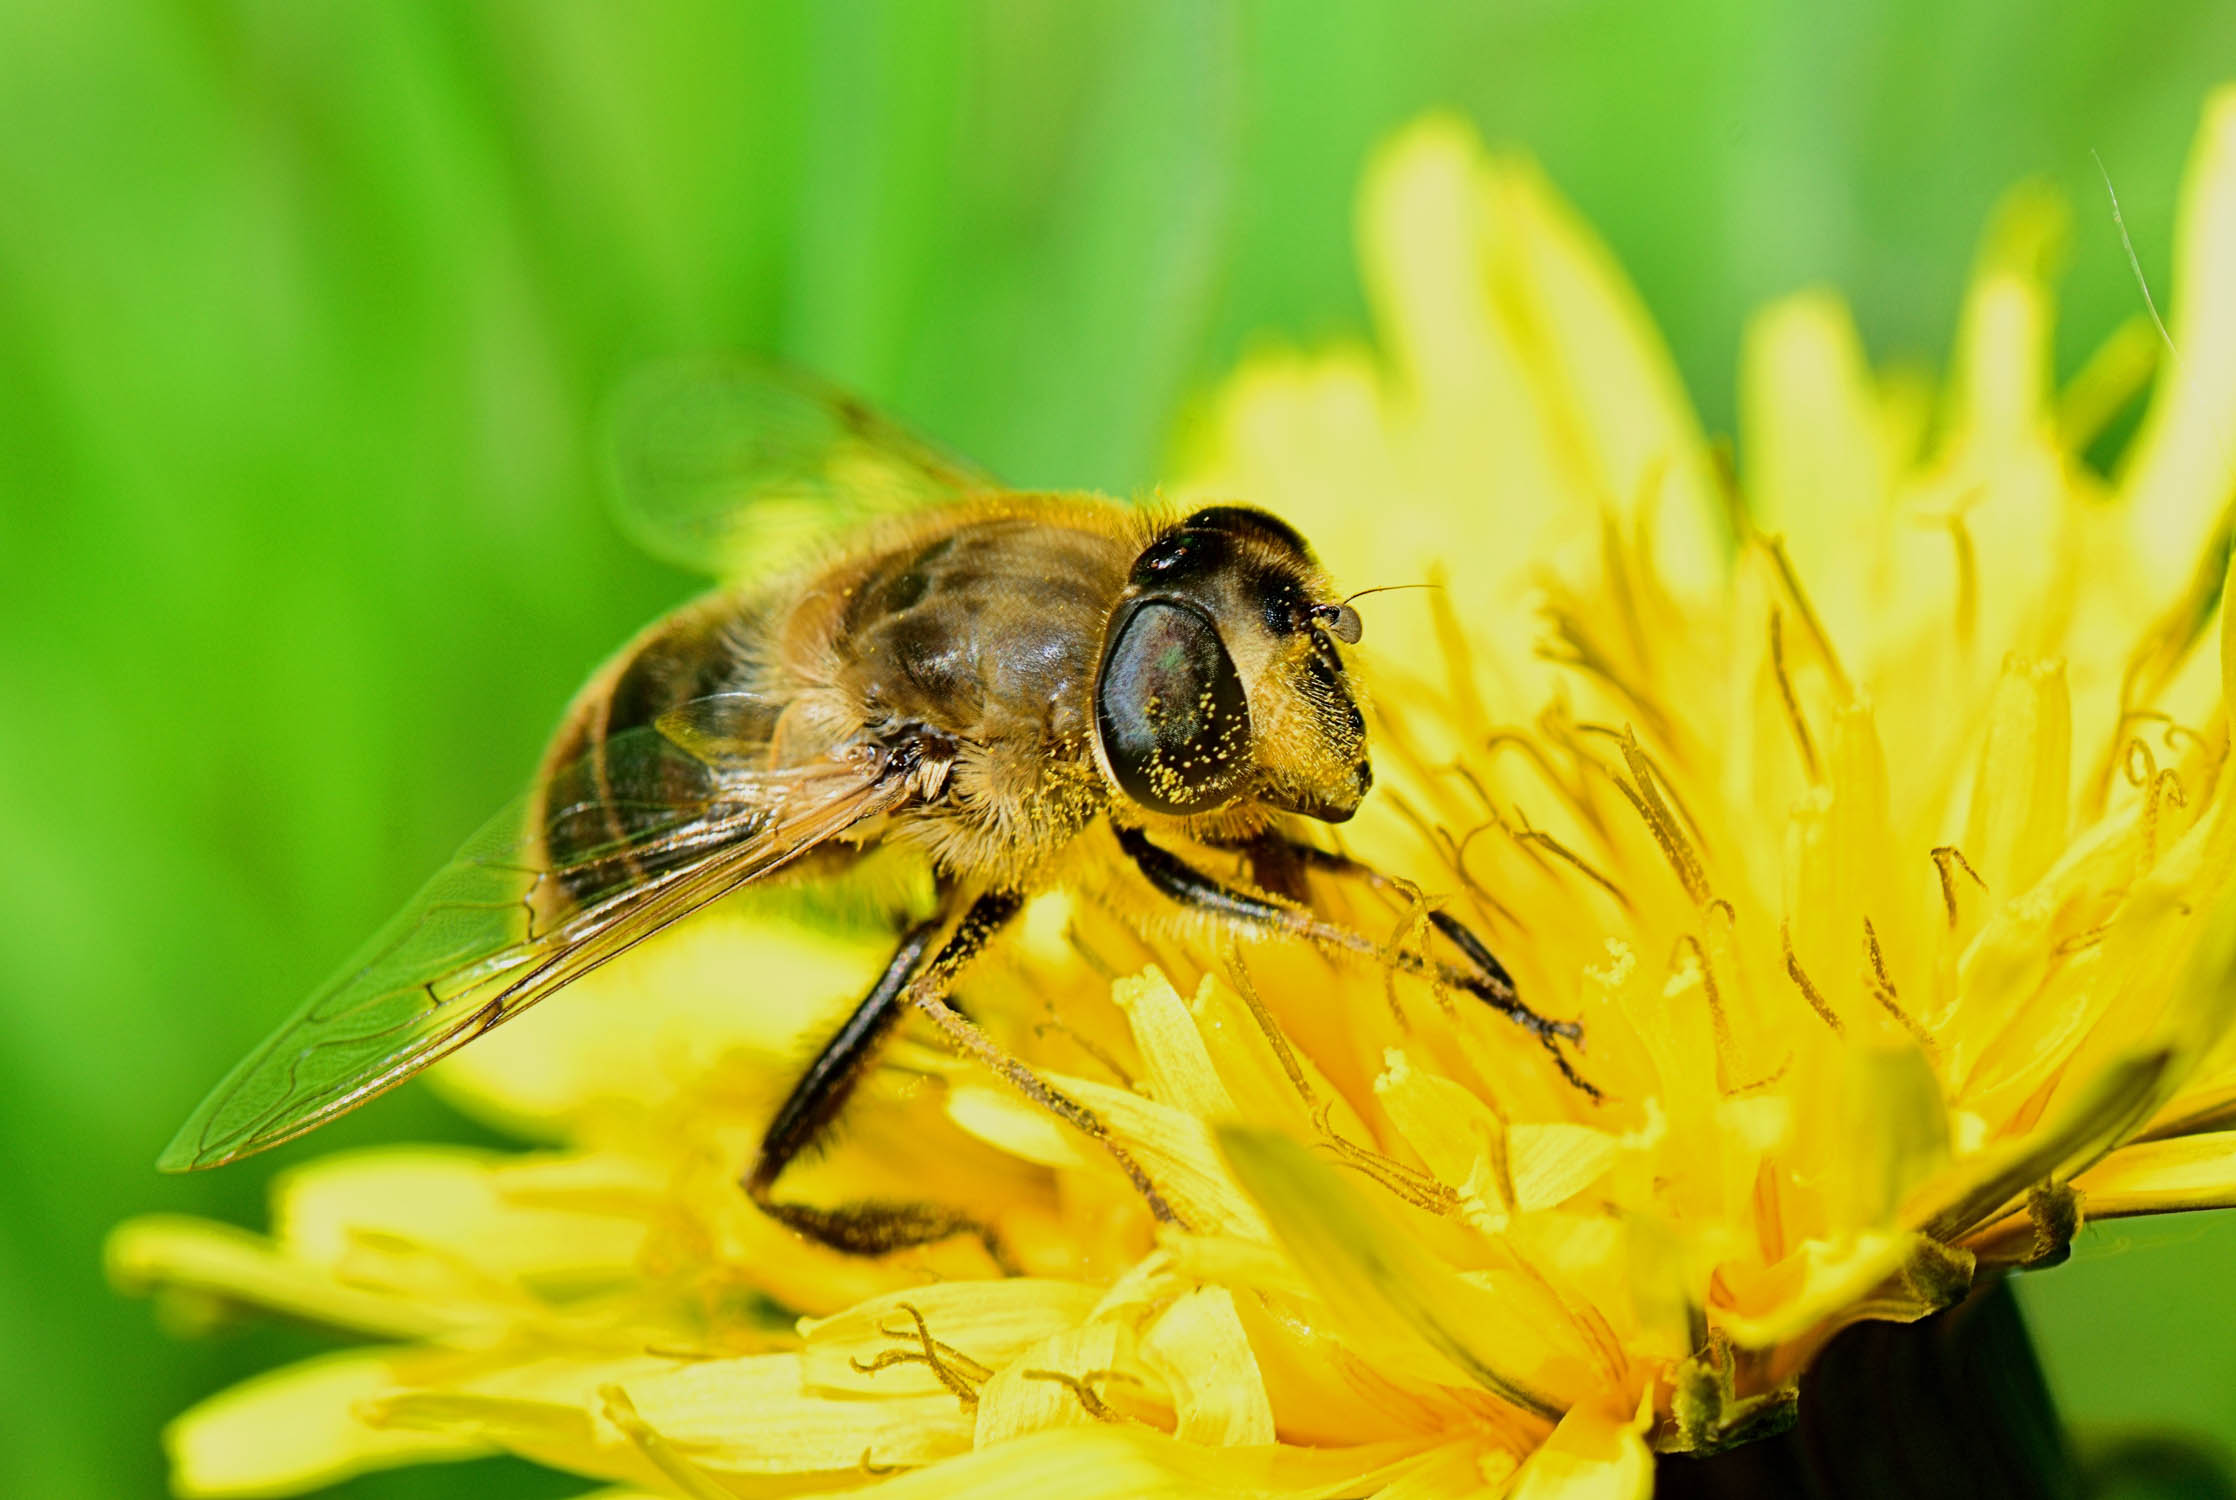 Dandelions are critical foods in the spring for bees!